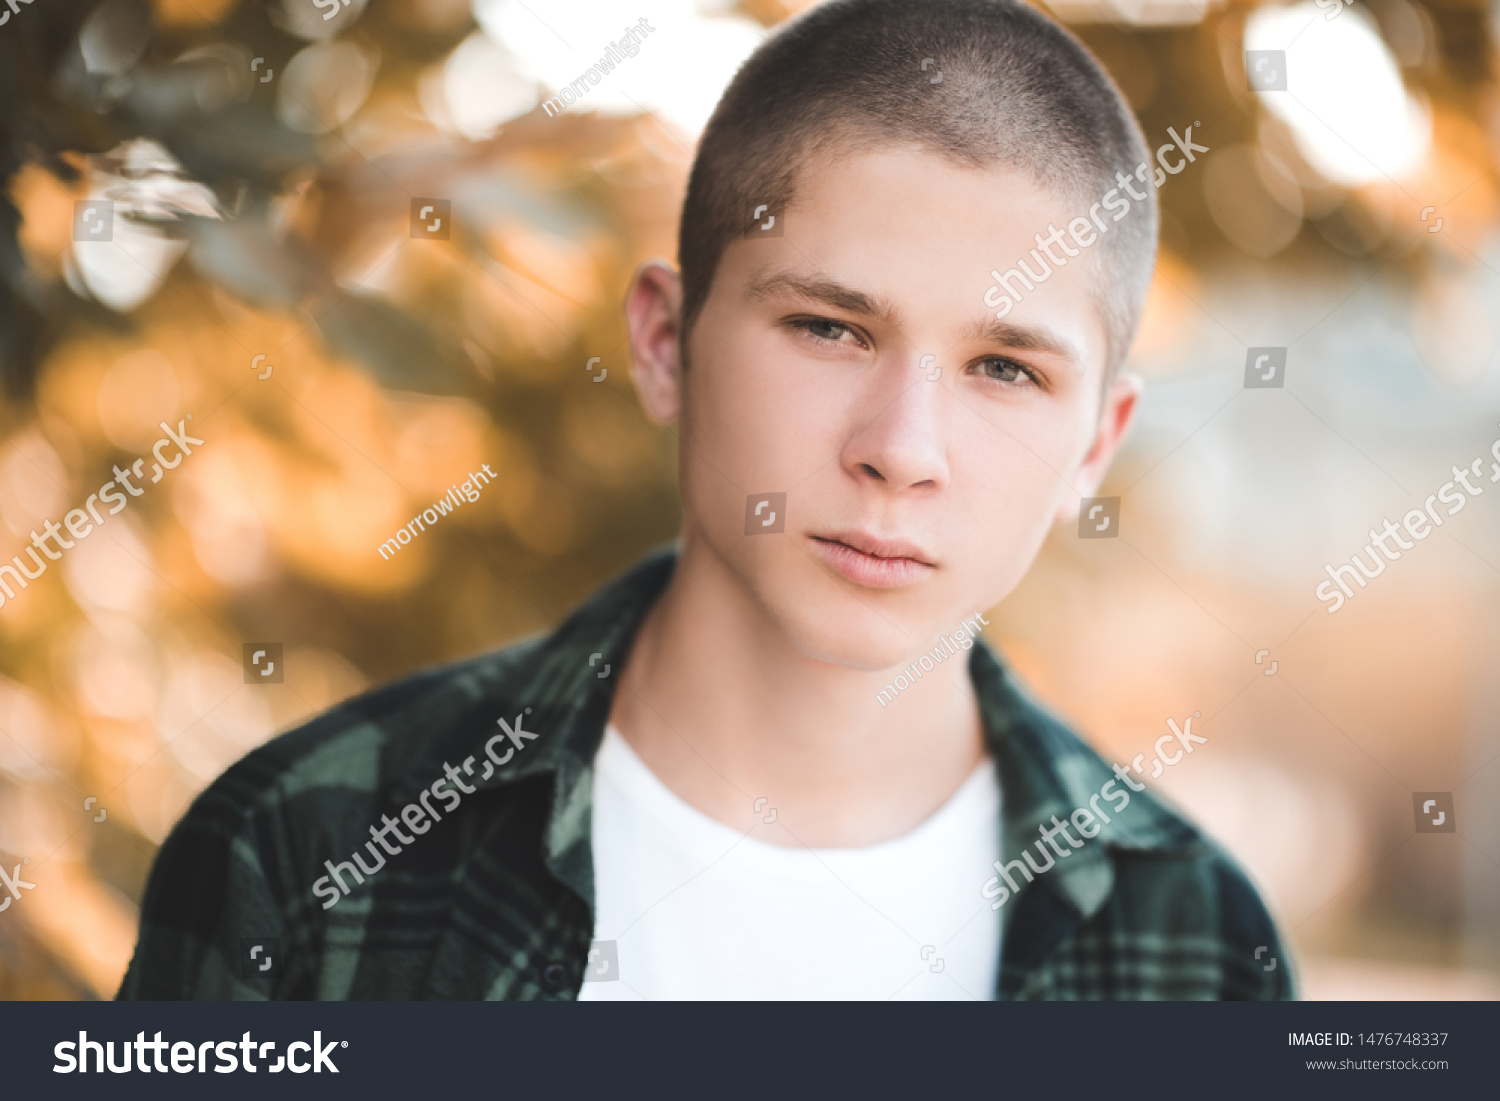 Handsome Man 1718 Year Old Short People Stock Image